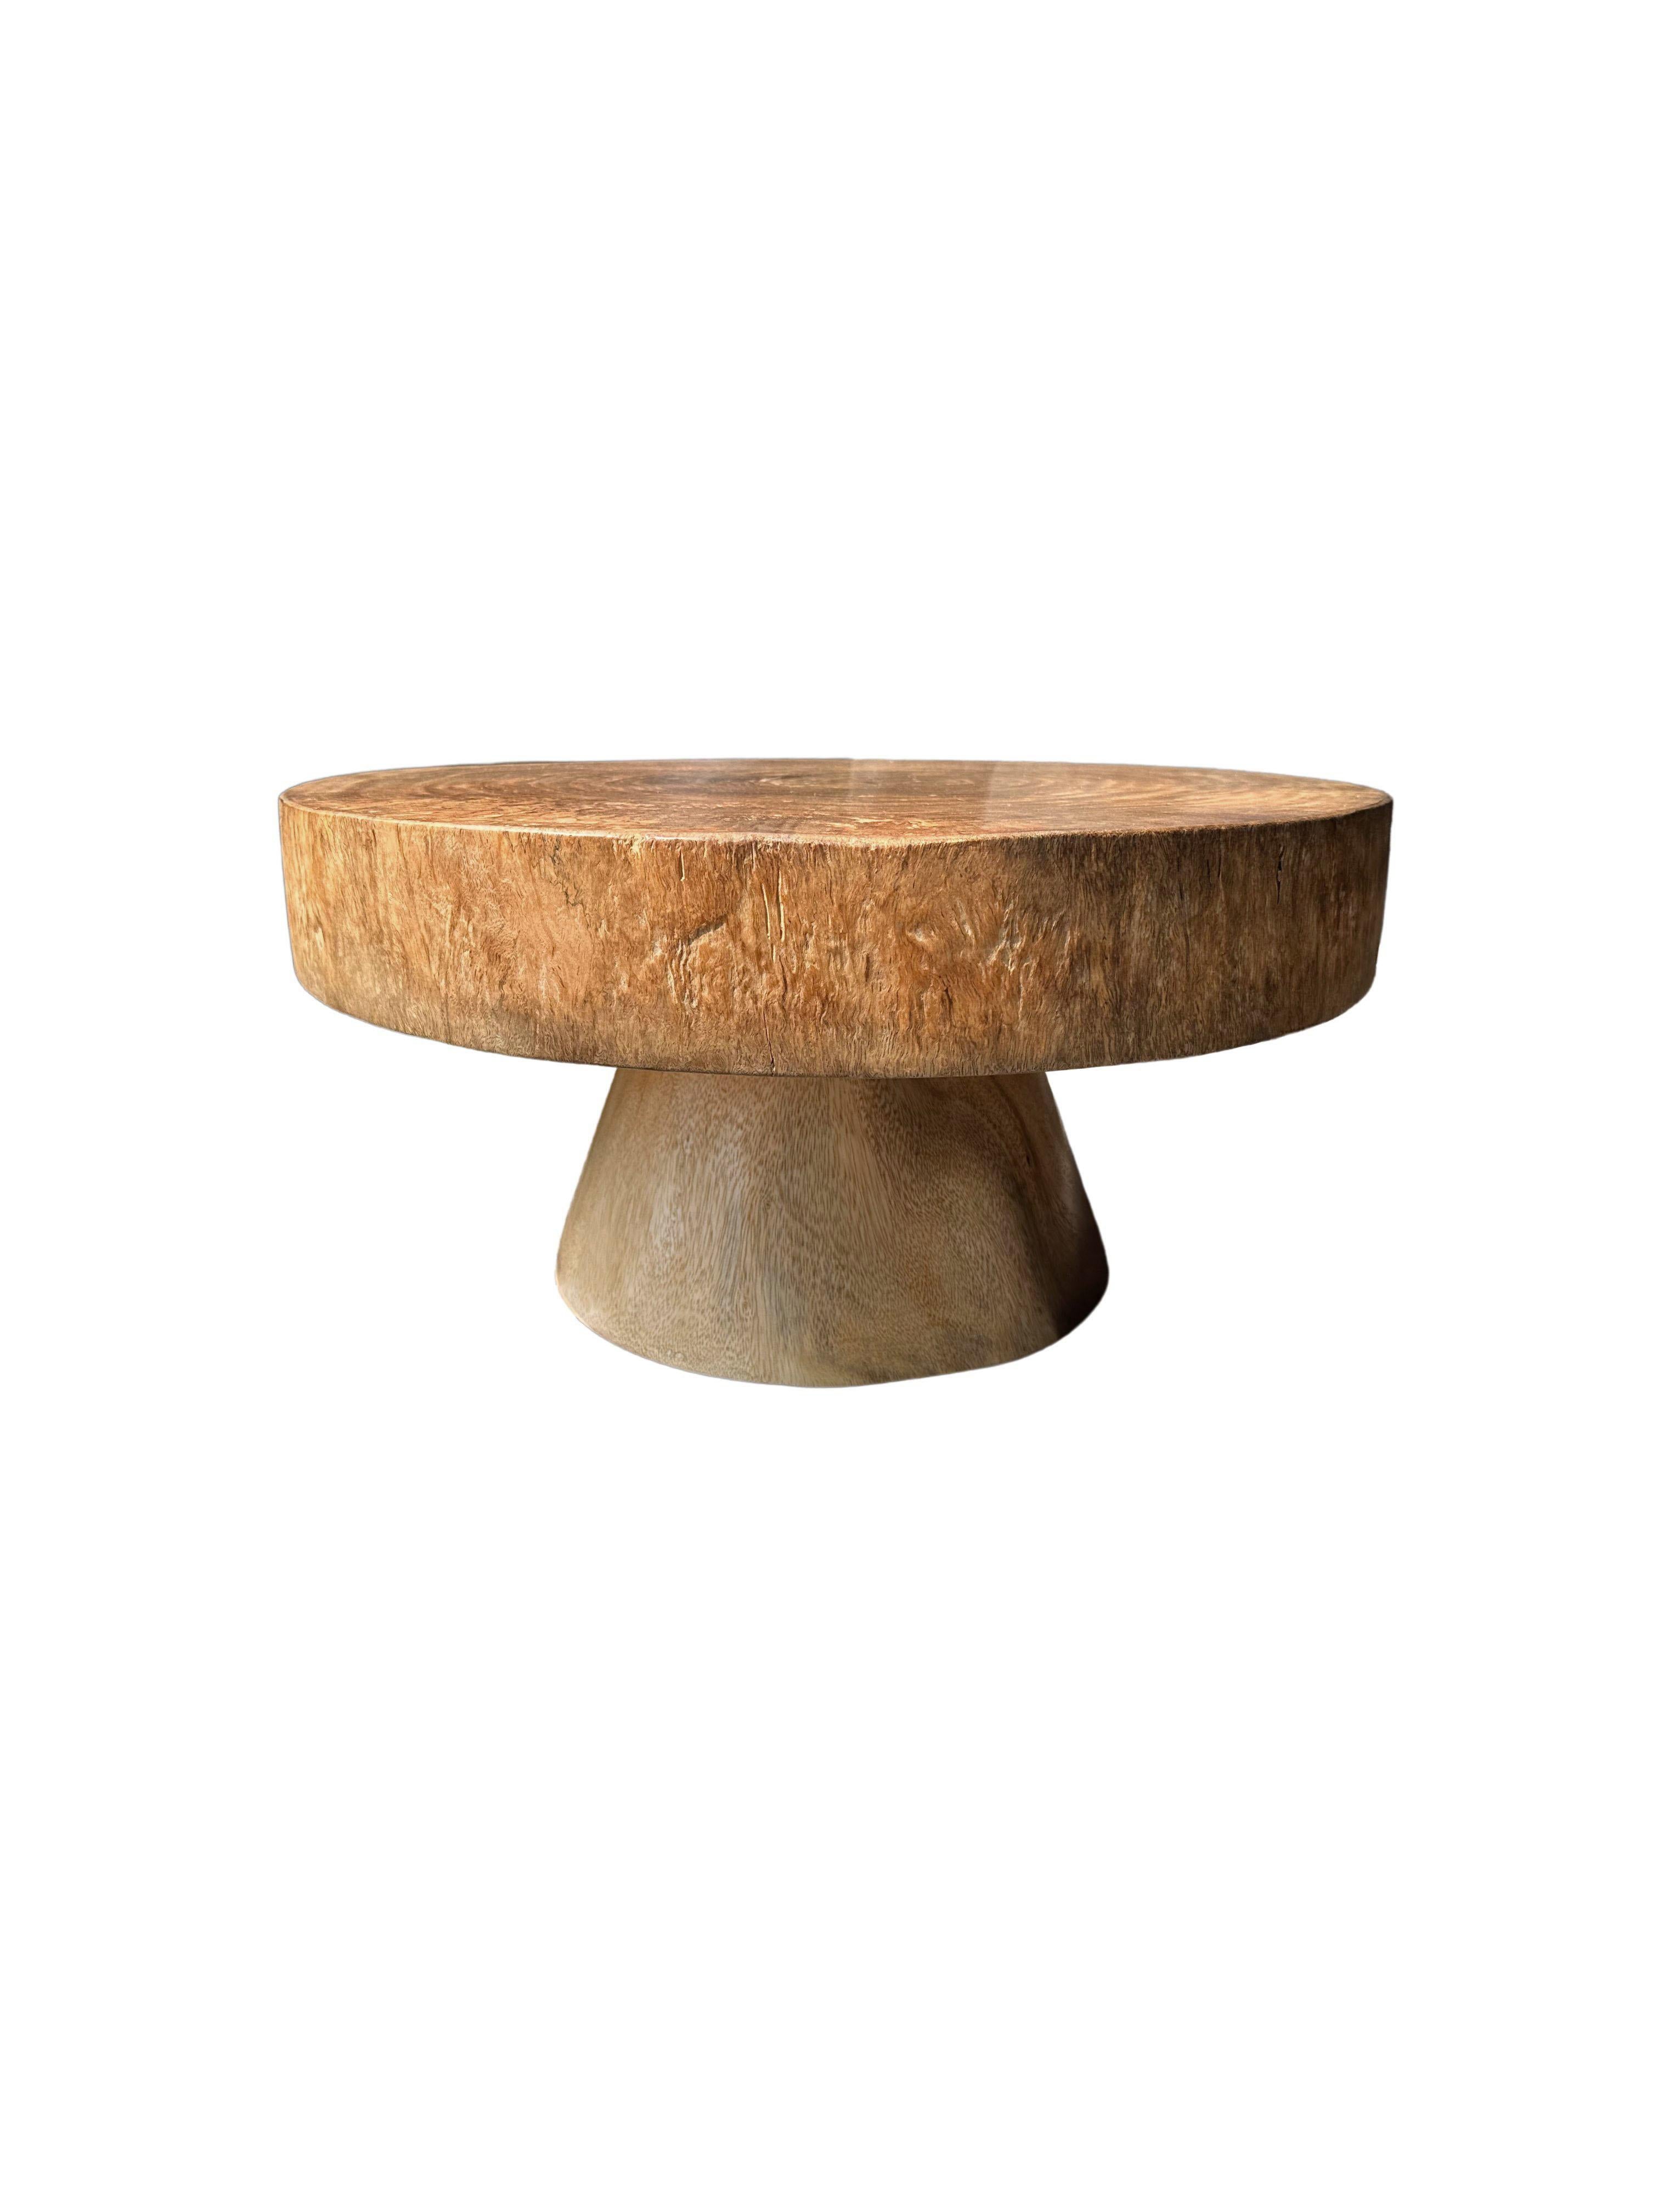 Indonesian Sculptural Round Table Crafted from Solid Mango Wood, Natural Finish For Sale